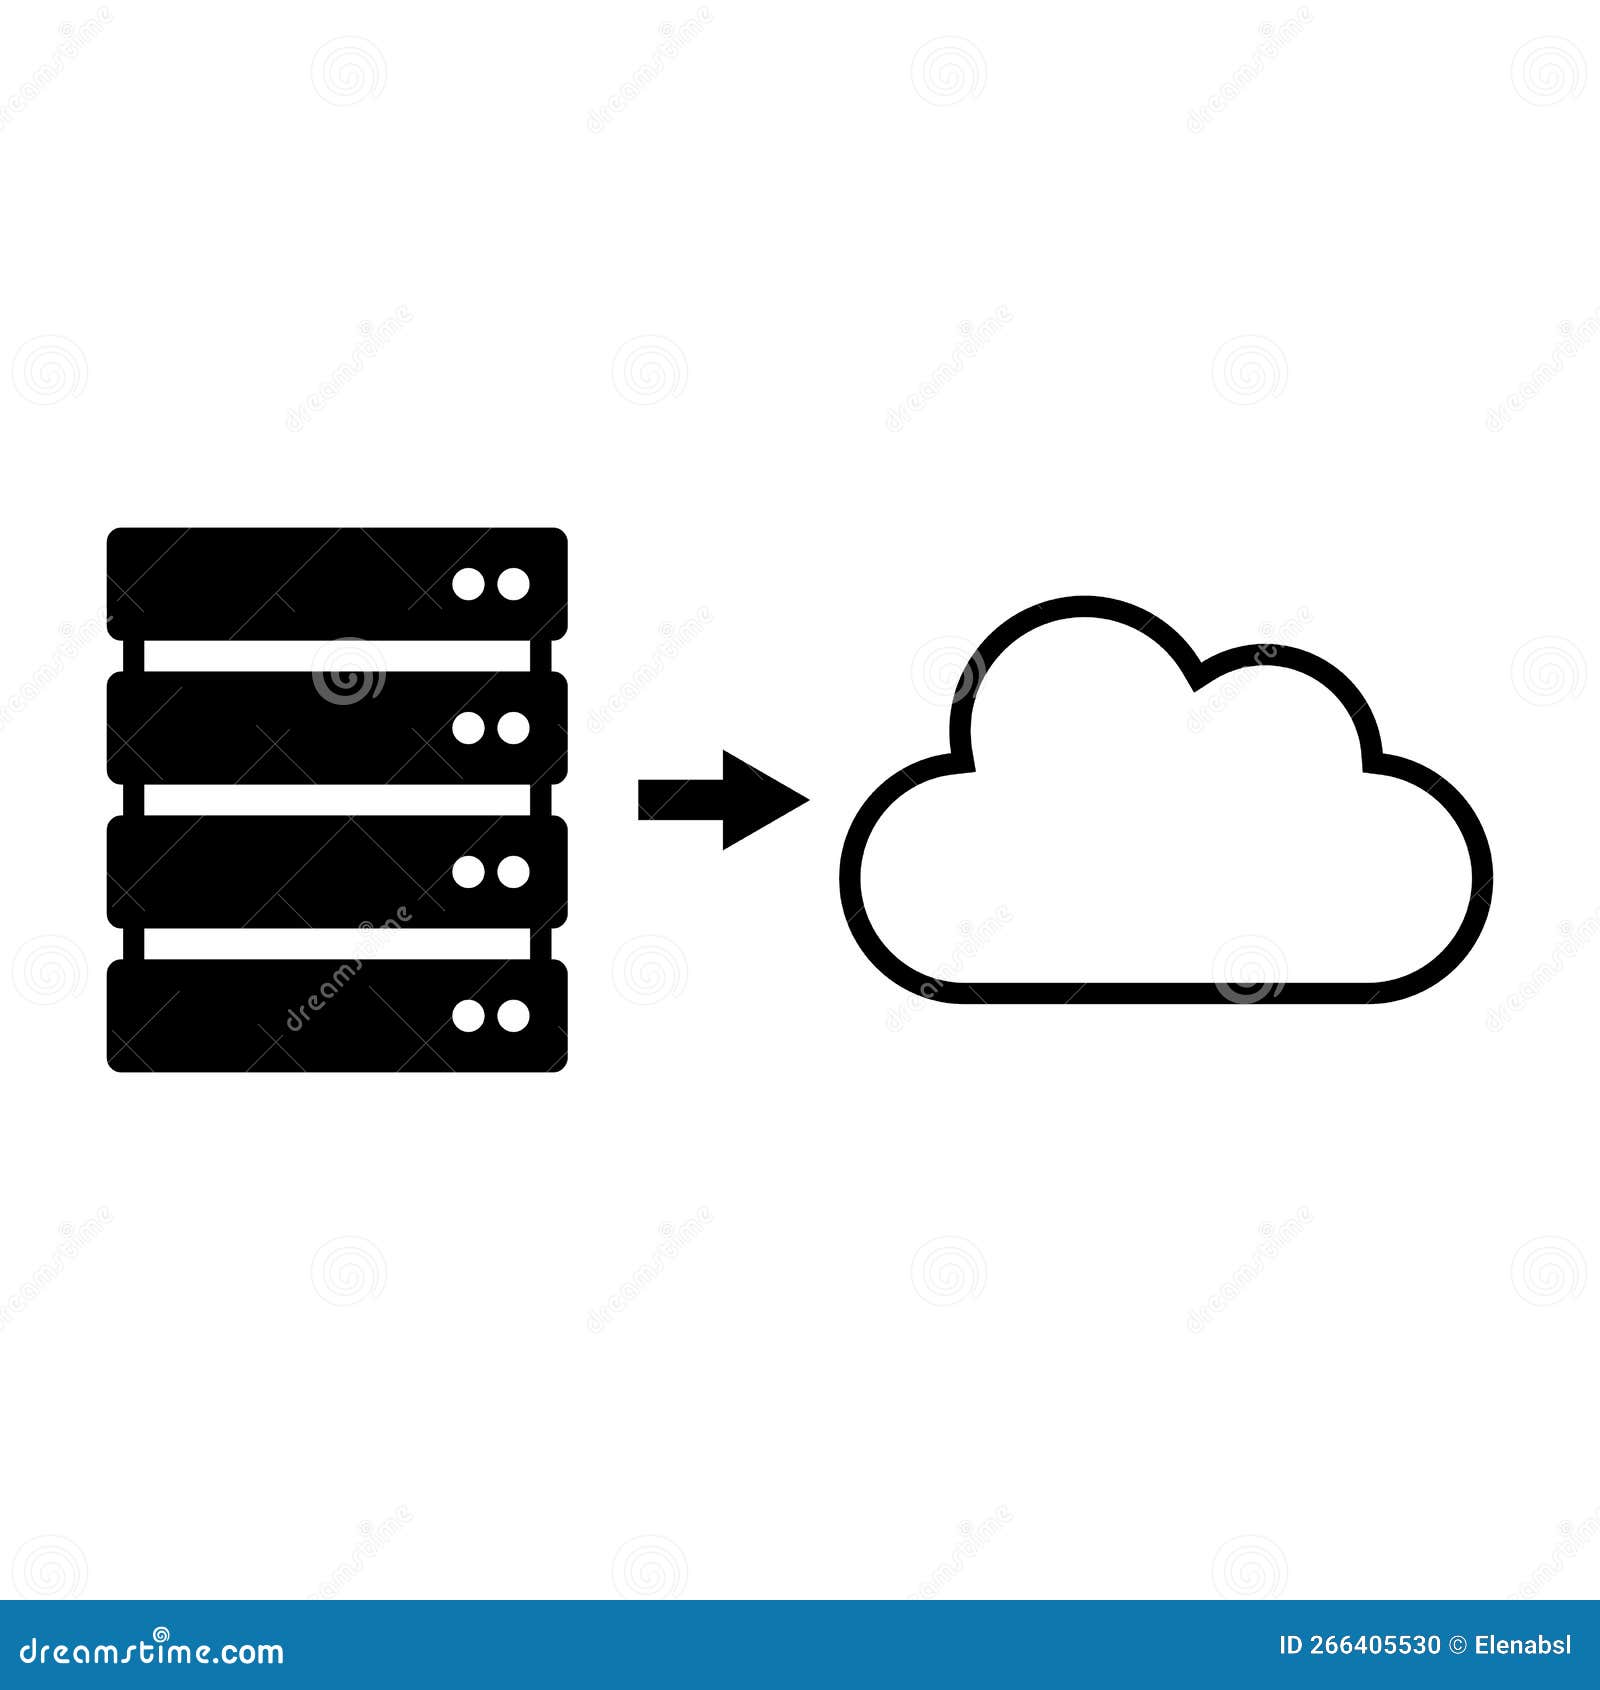 cloud migration and cloud computing icon